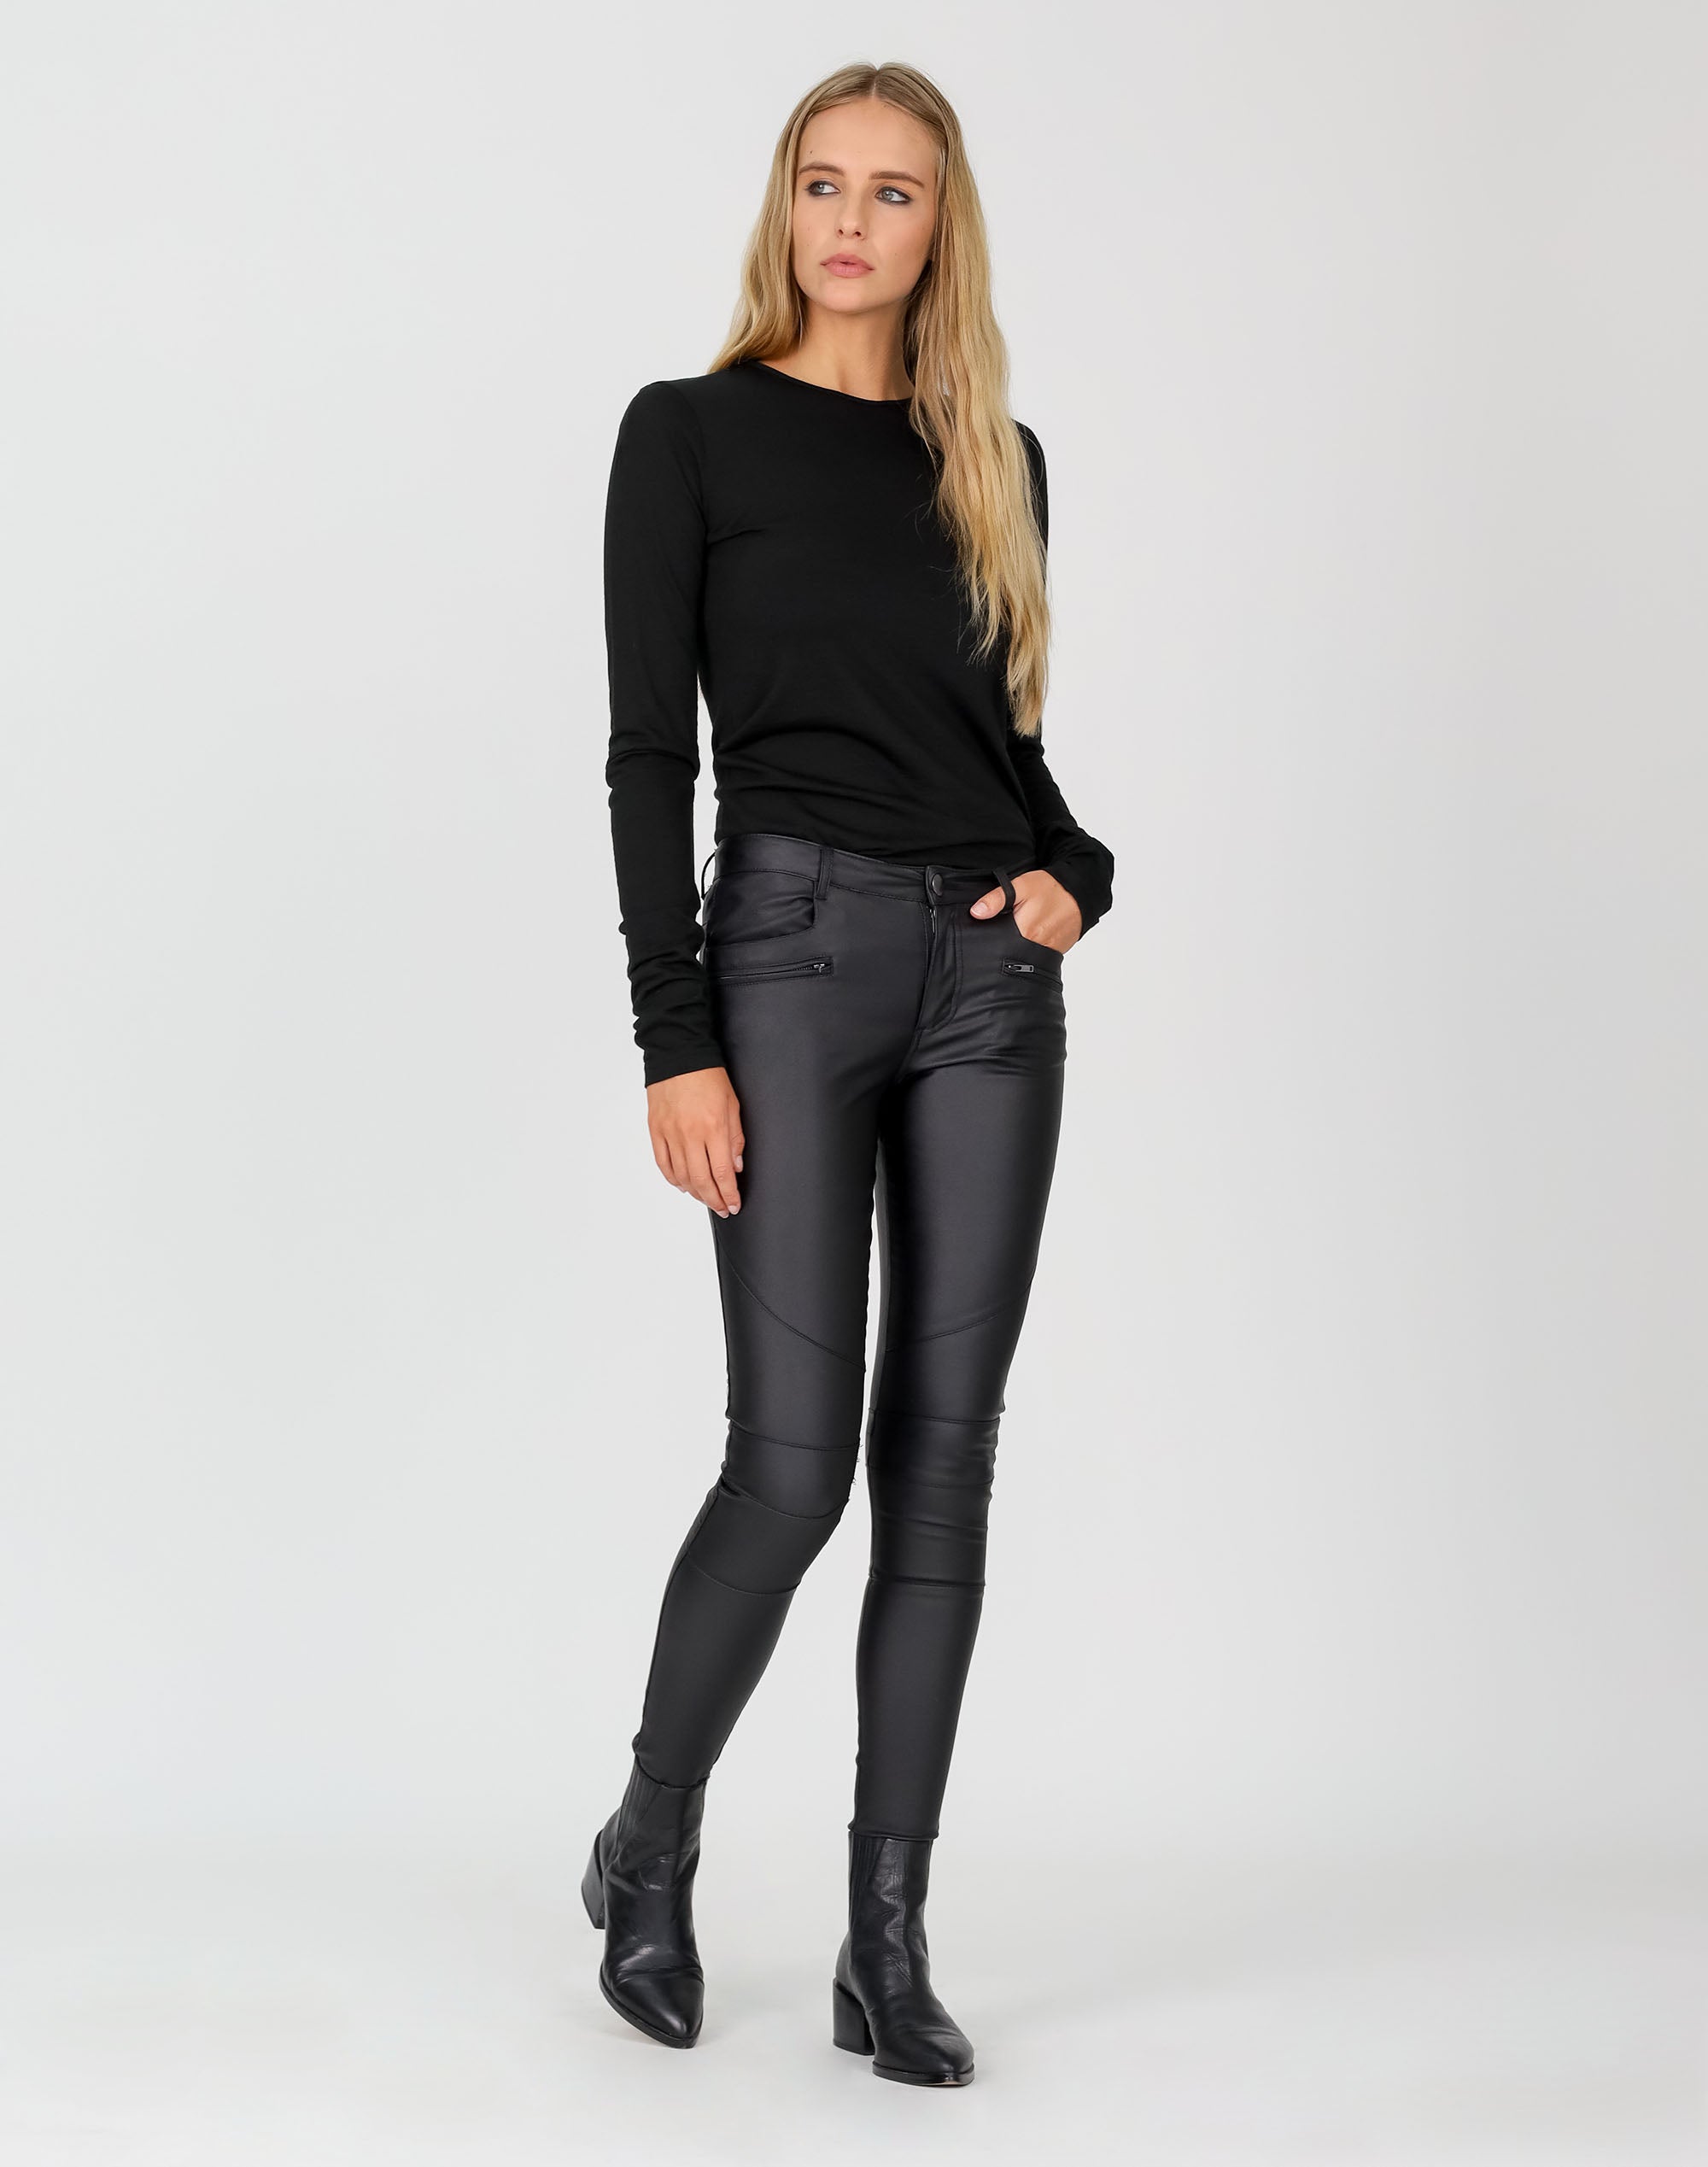 Mid Rise Leather Look Jean